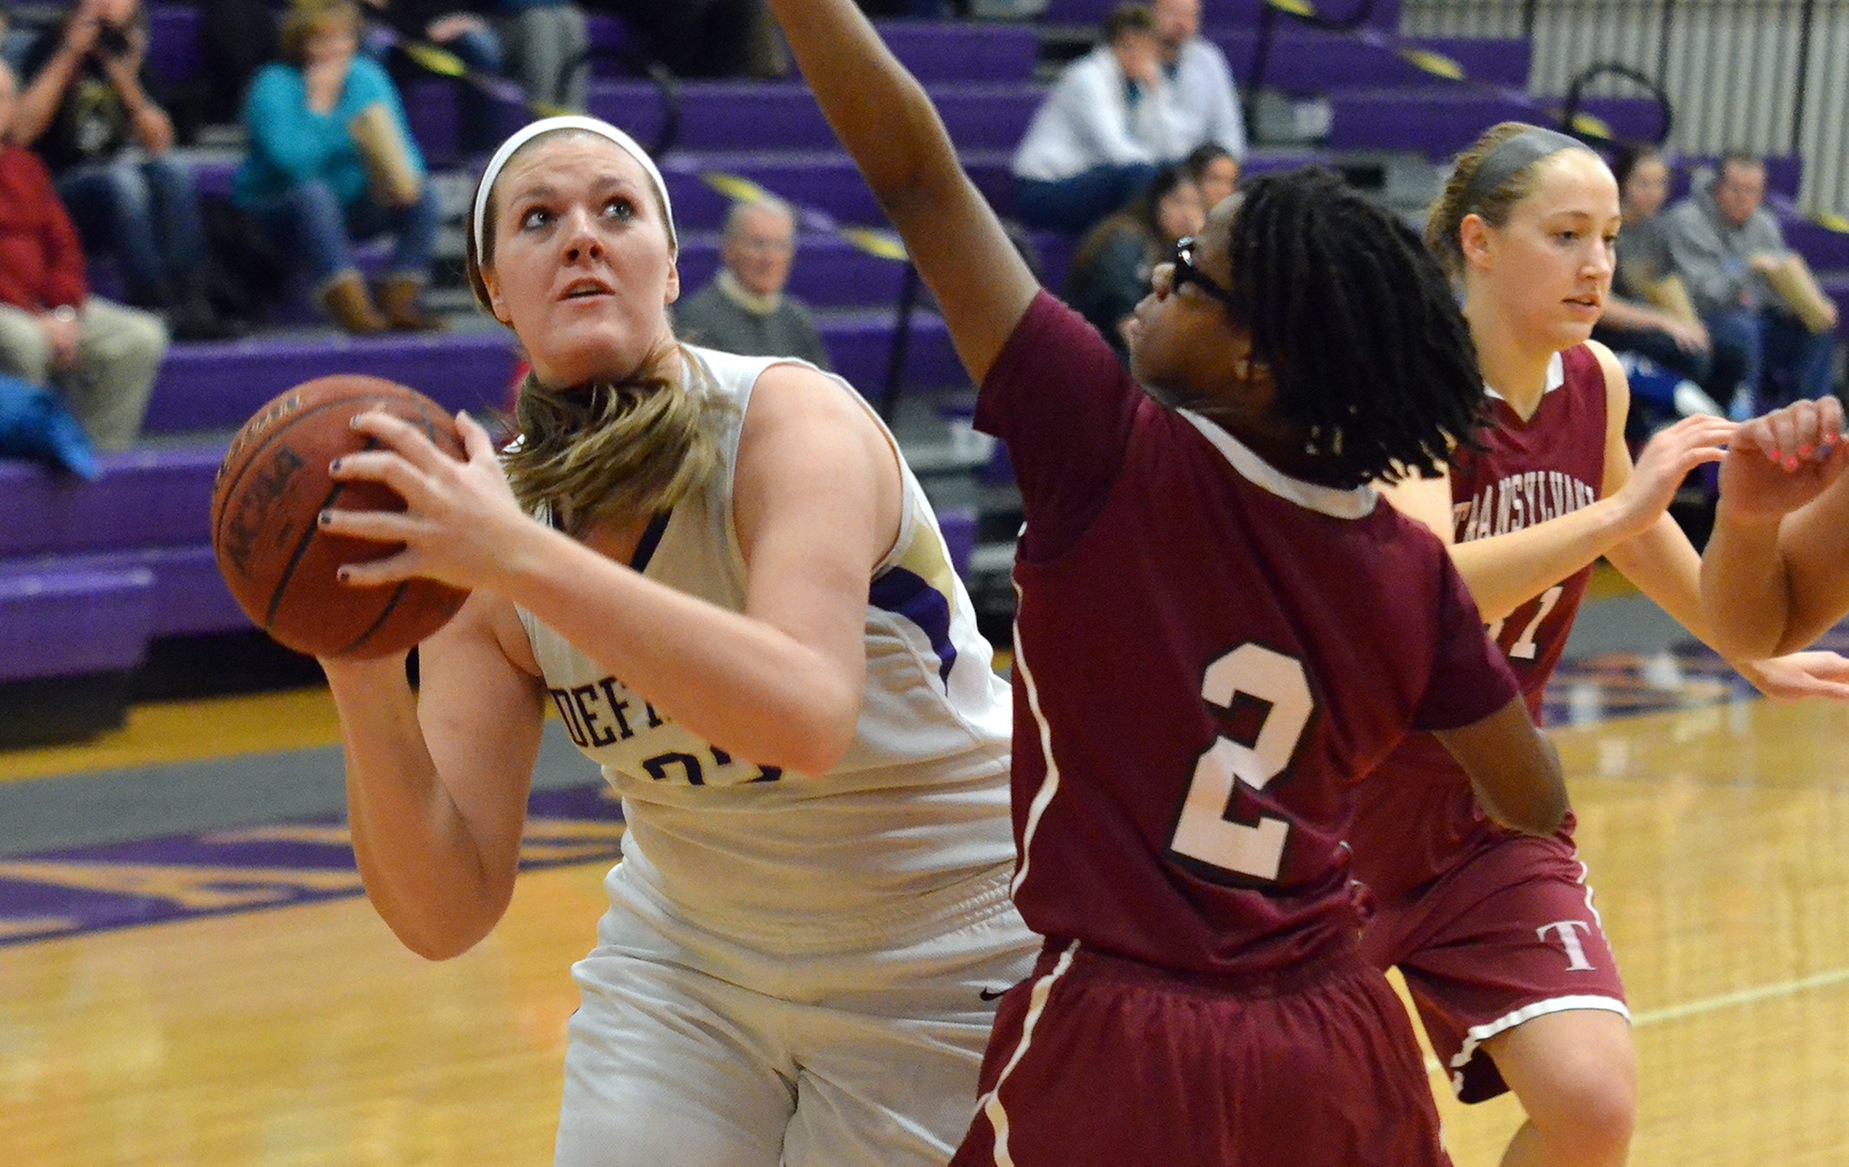 Tietje Goes Over 1000 Rebounds in Loss to Hanover